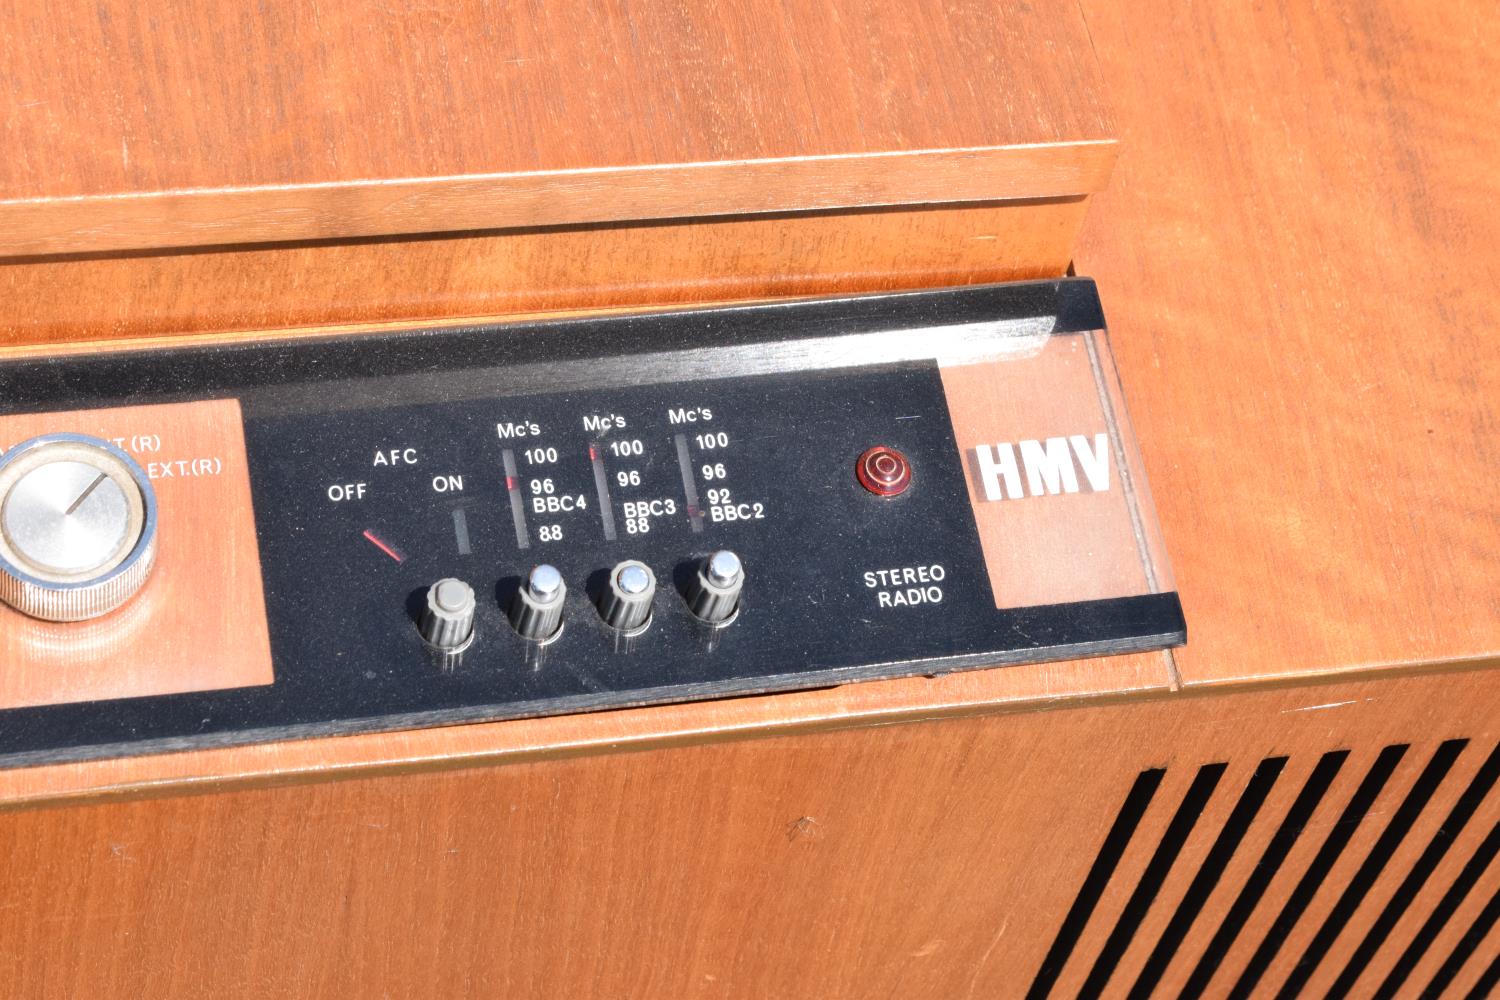 HMV teak radiogram unit. 96 x 44 x 60cm. In good condition with signs of age-related wear and - Image 3 of 6